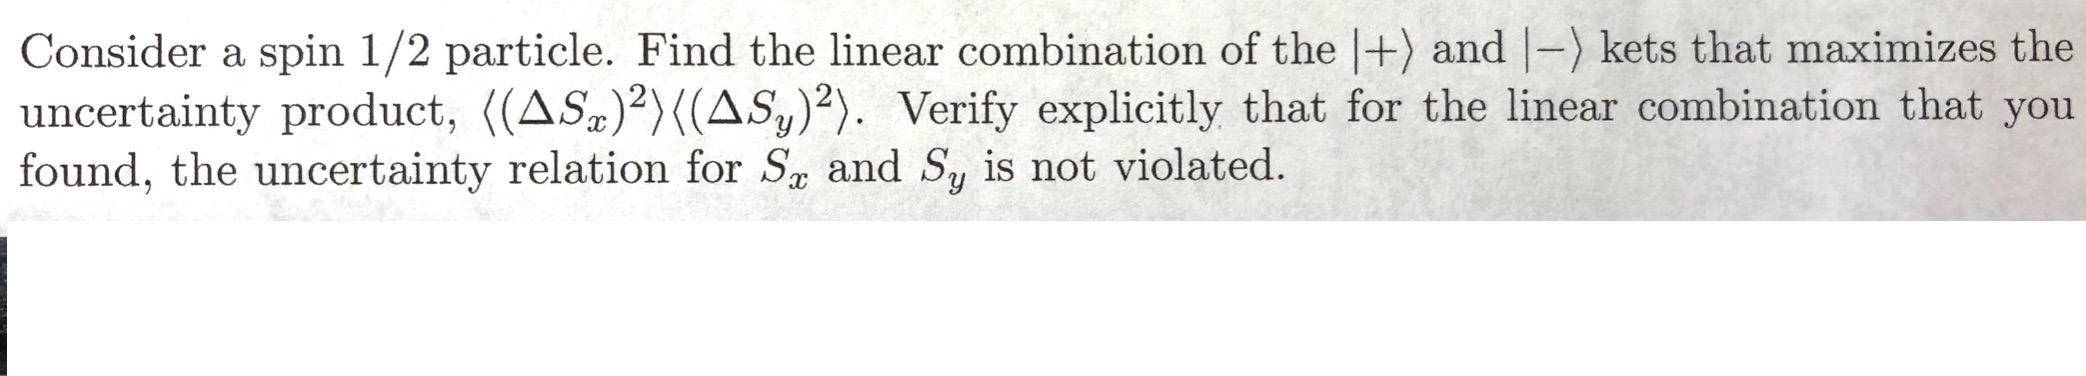 Consider a spin 1/2 particle. Find the linear combination of the |+) and |-) kets that maximizes the
uncertainty product, ((AS)2){(AS,)2). Verify explicitly that for the linear combination that you
found, the uncertainty relation for Sa and Sy is not violated.
